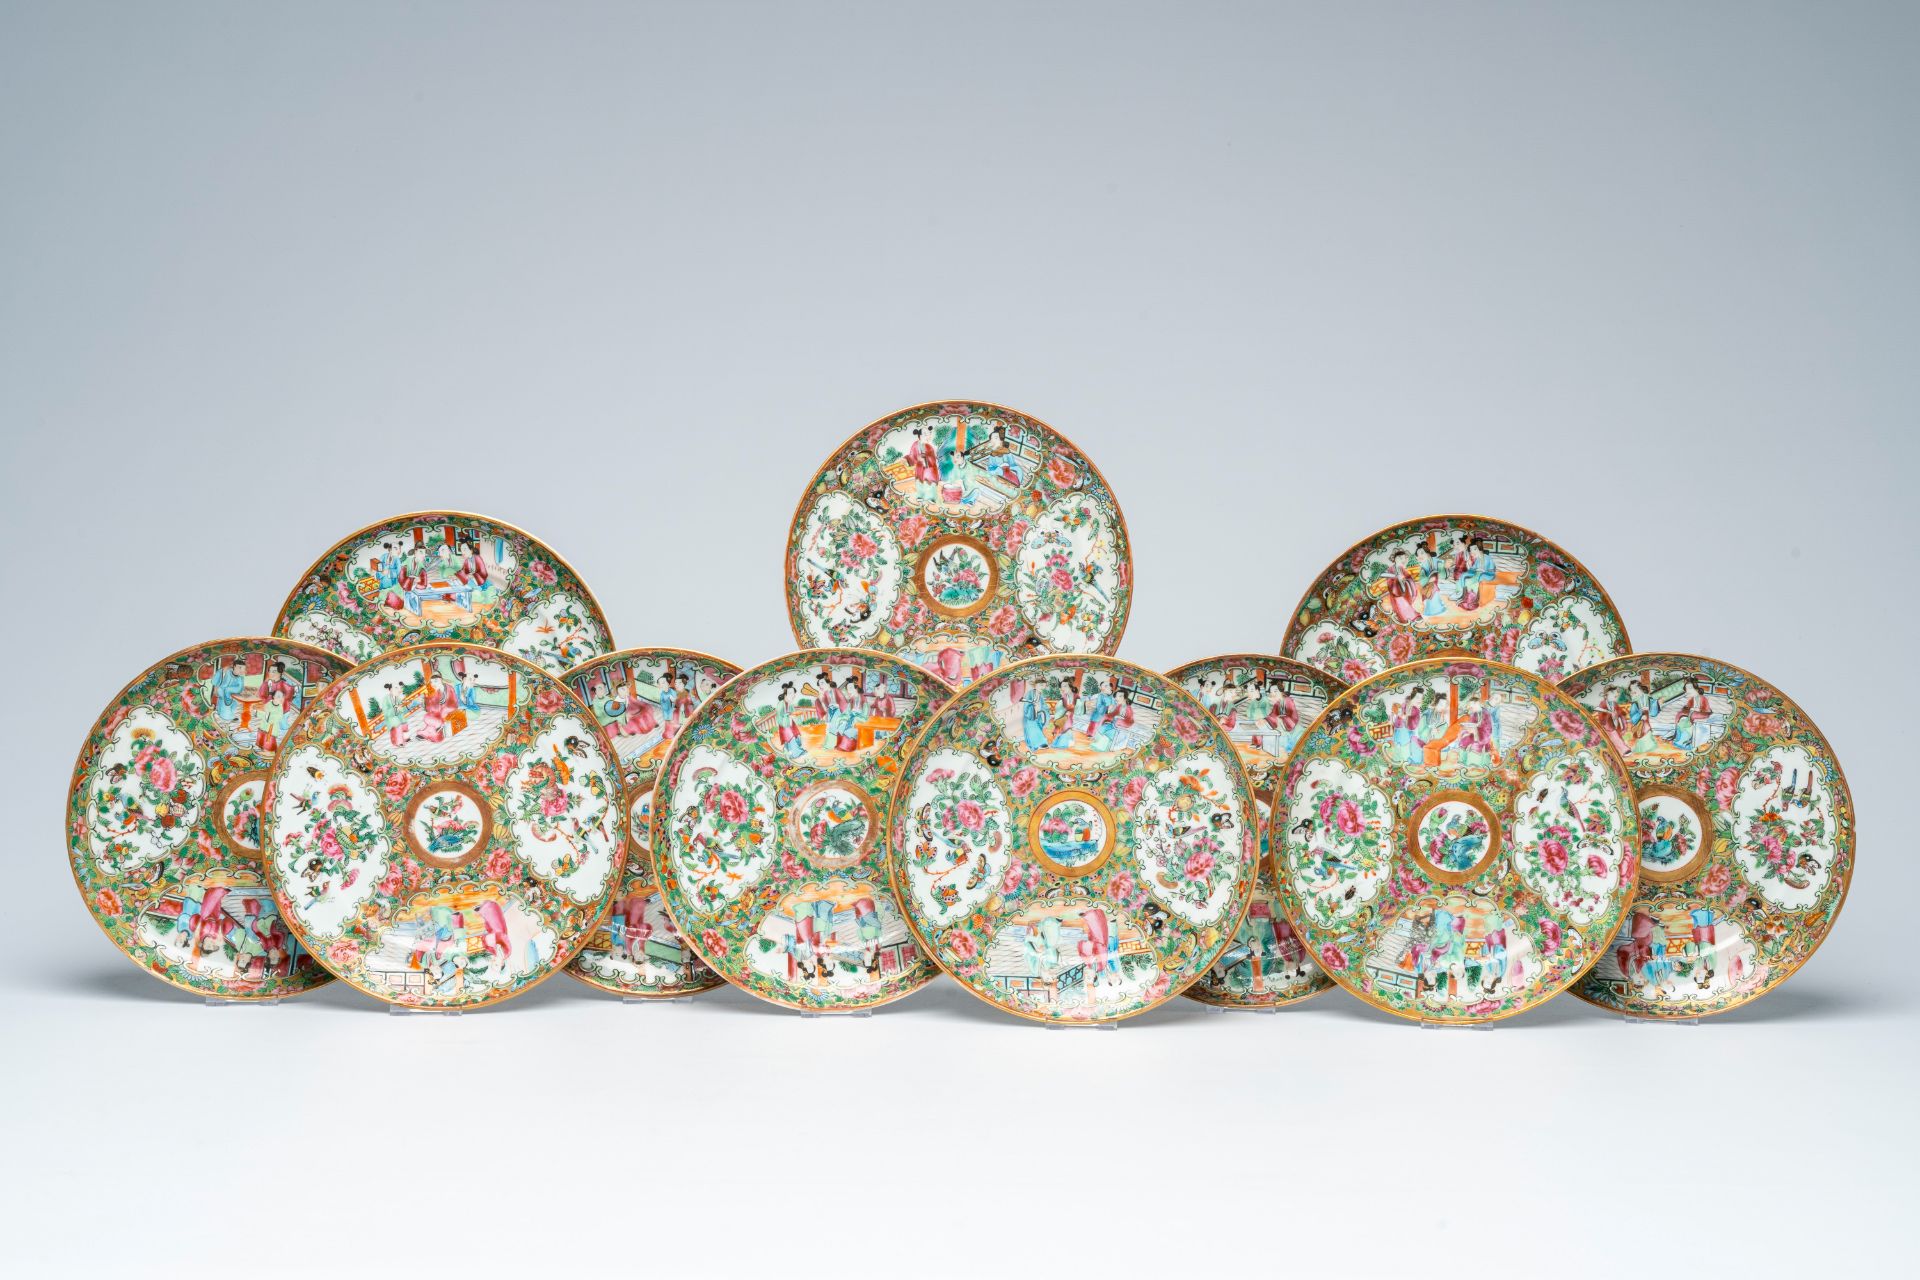 Eleven Chinese Canton famille rose plates with palace scenes and floral design, 19th C.